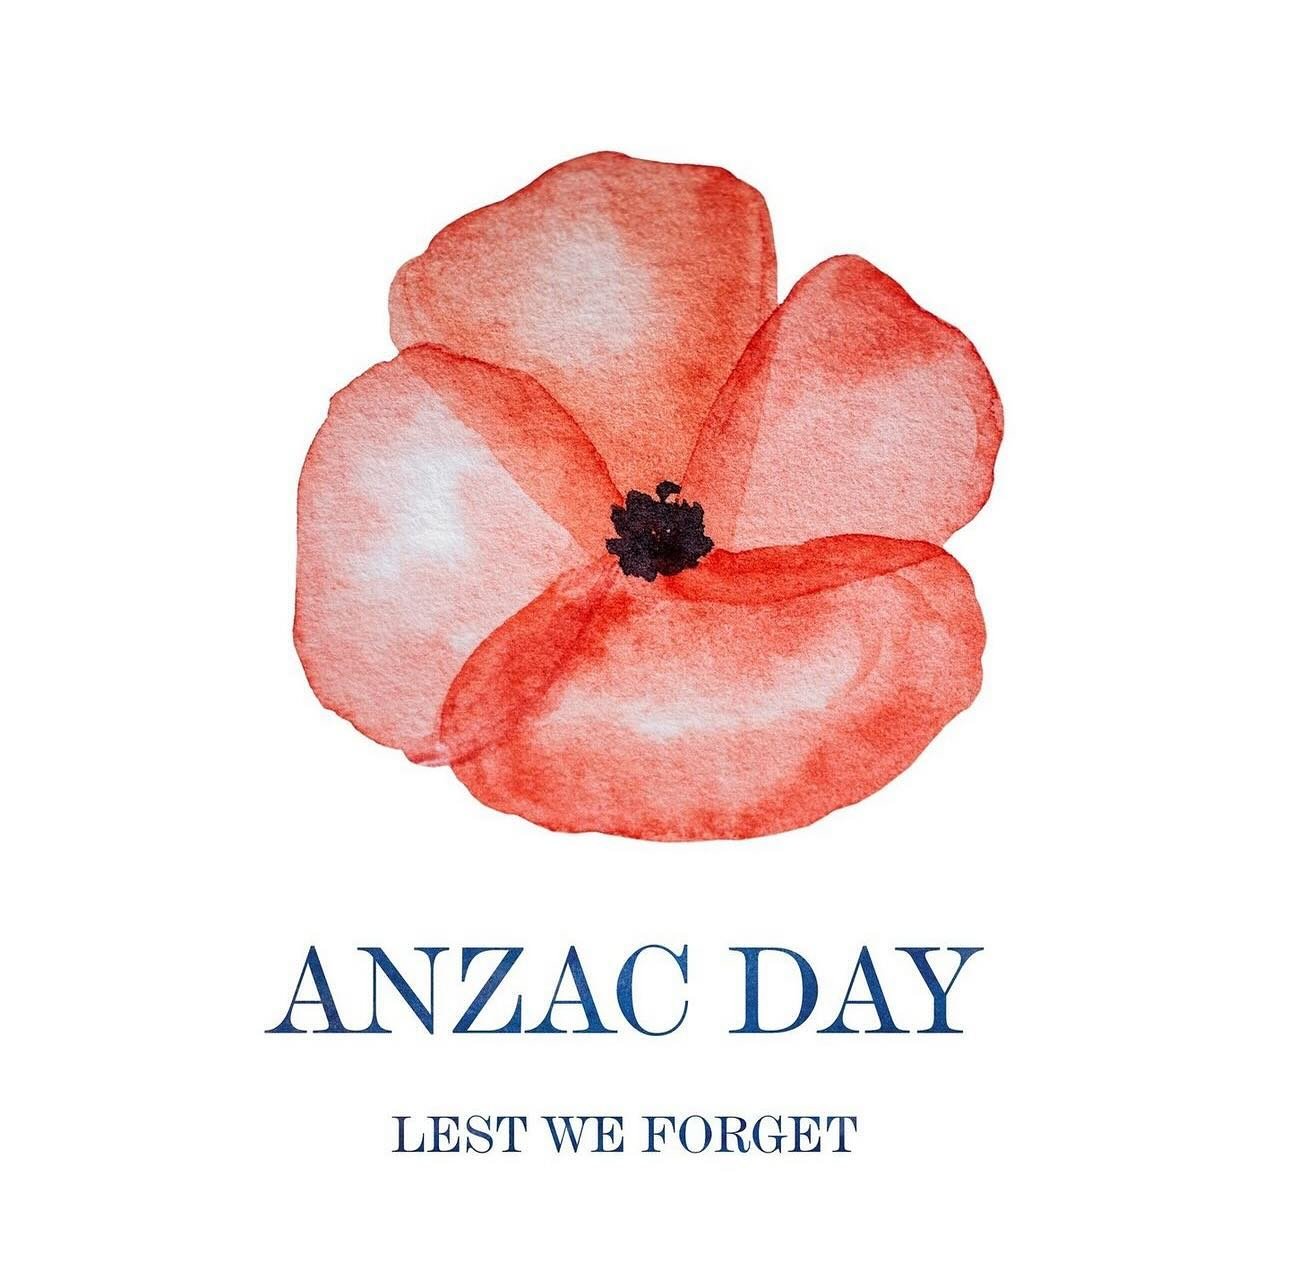 🌹 Lest we forget. Today, we honor the bravery, sacrifice, and resilience of the Anzacs. Let&rsquo;s take a moment to reflect on their courage and the enduring legacy they&rsquo;ve left behind. #AnzacDay #LestWeForget 🇦🇺🇳🇿